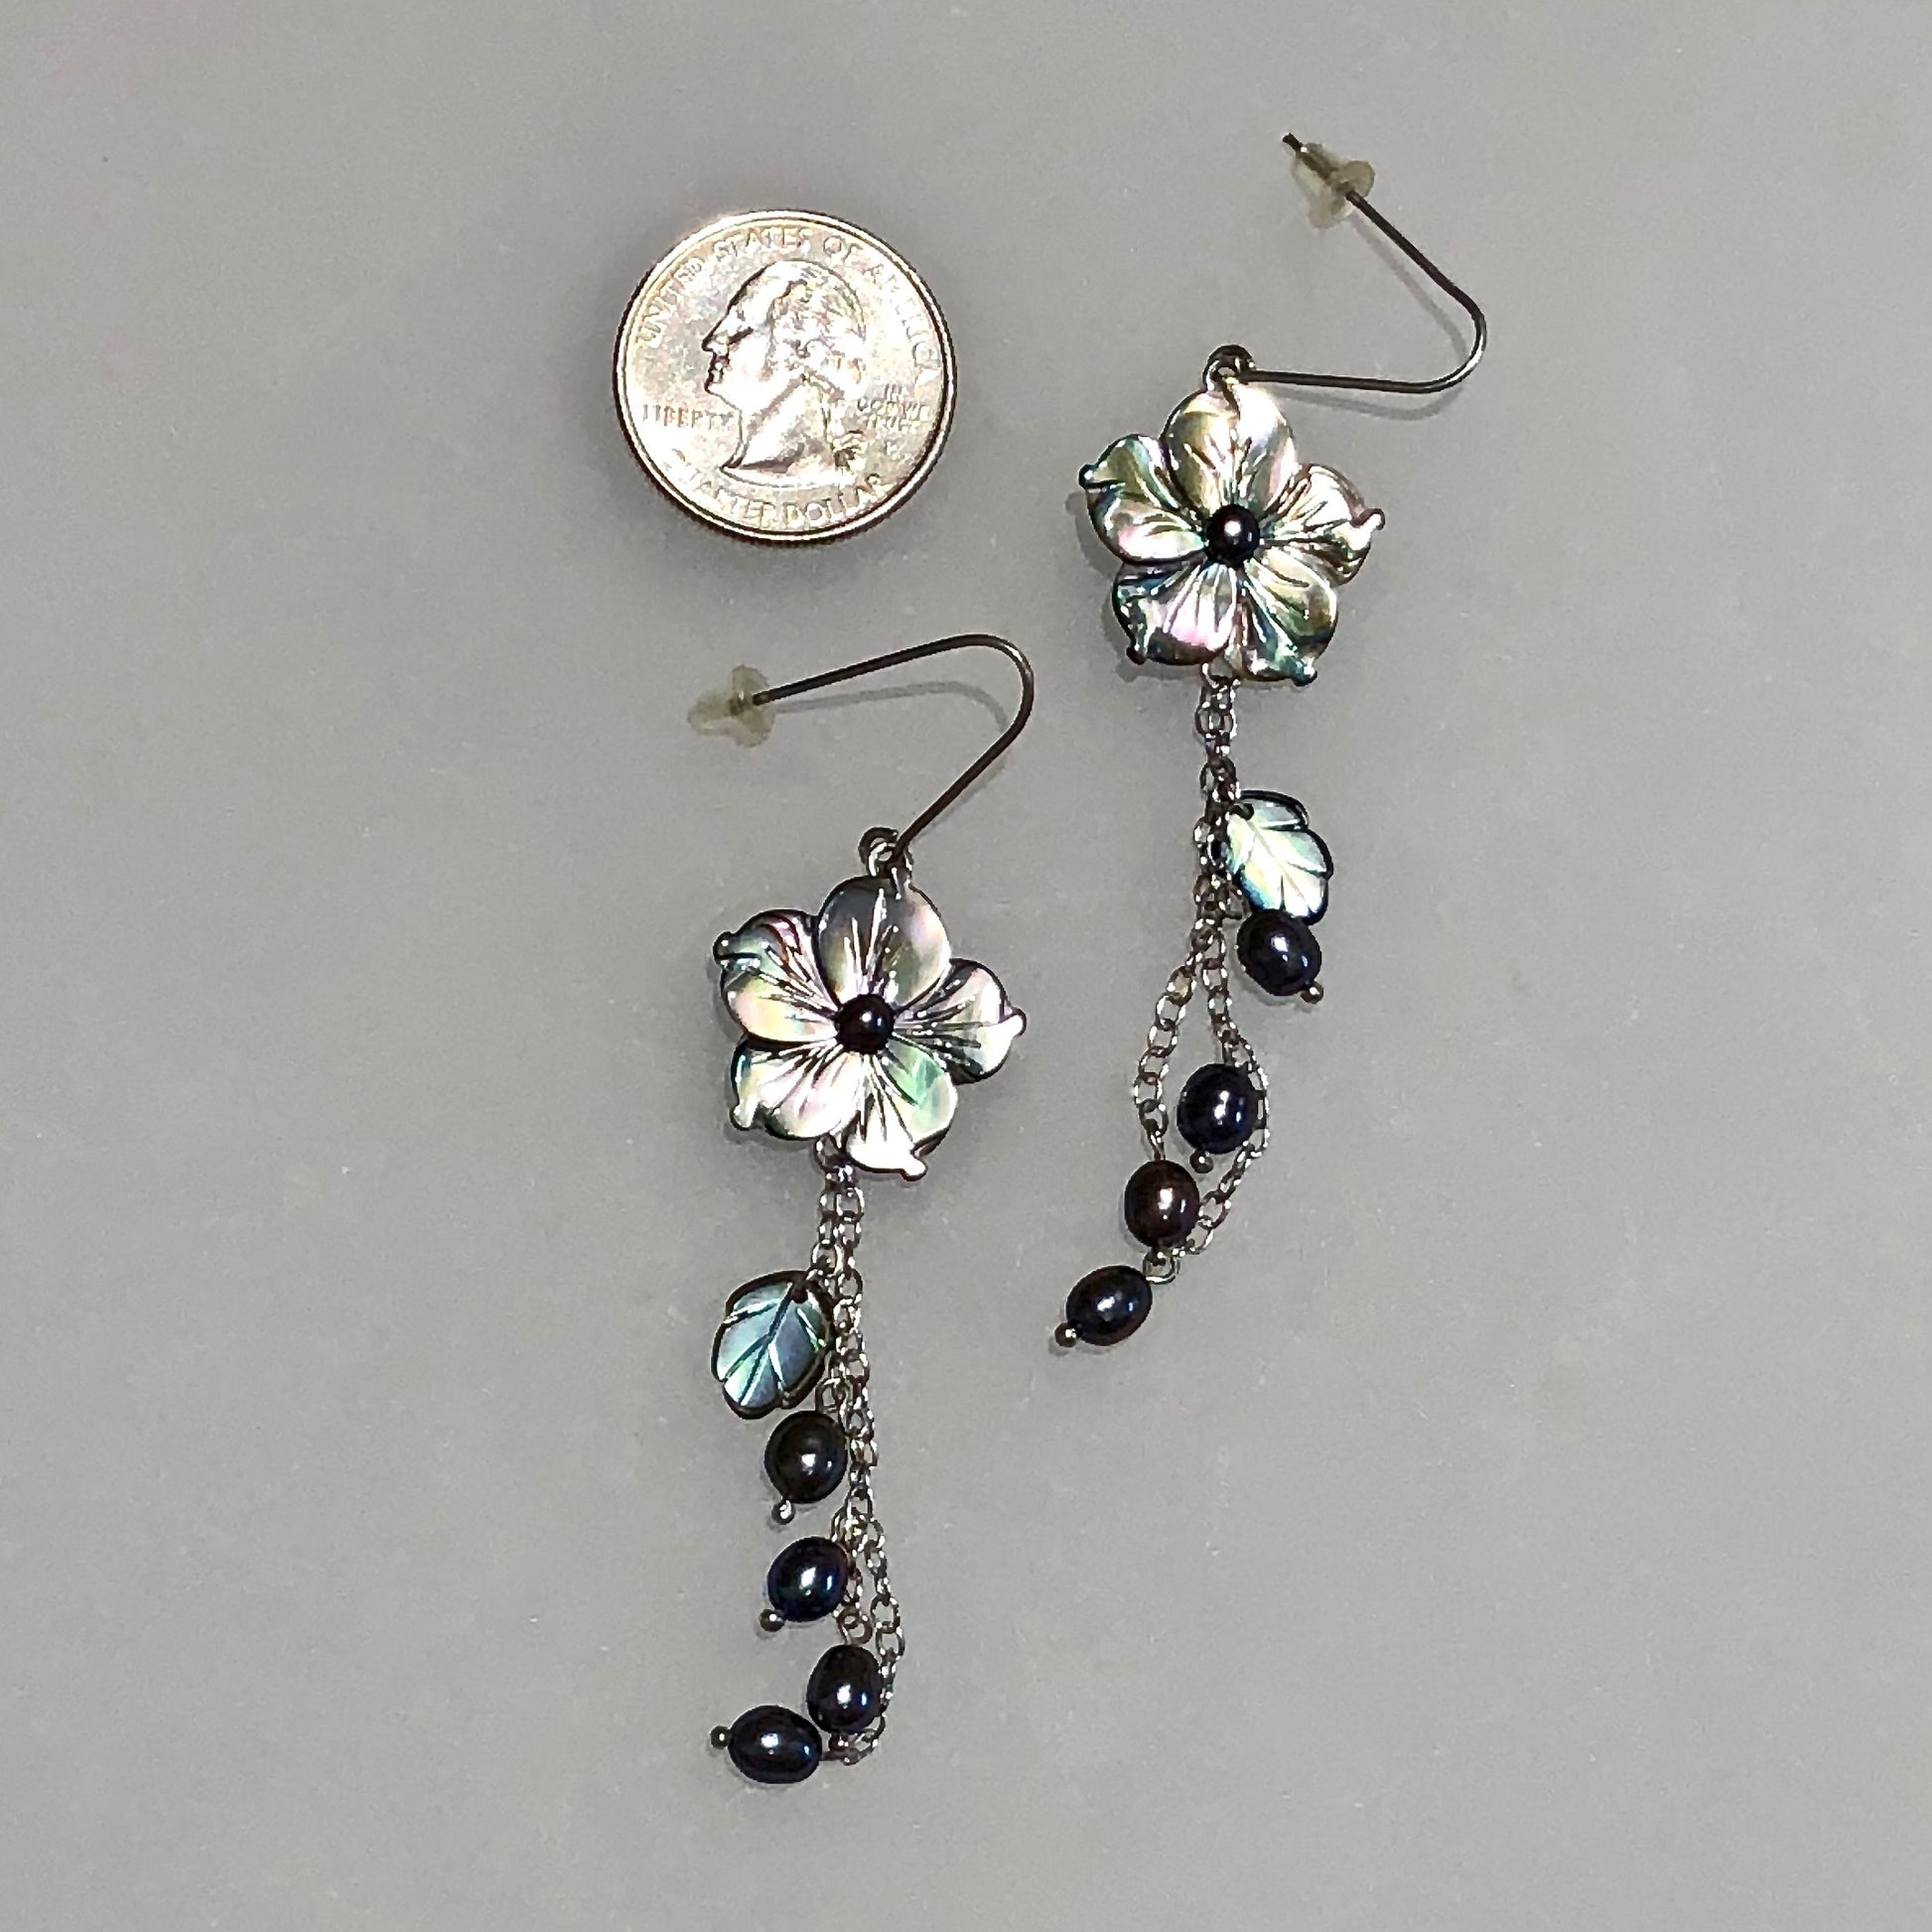 Sizing comparison abalone earrings